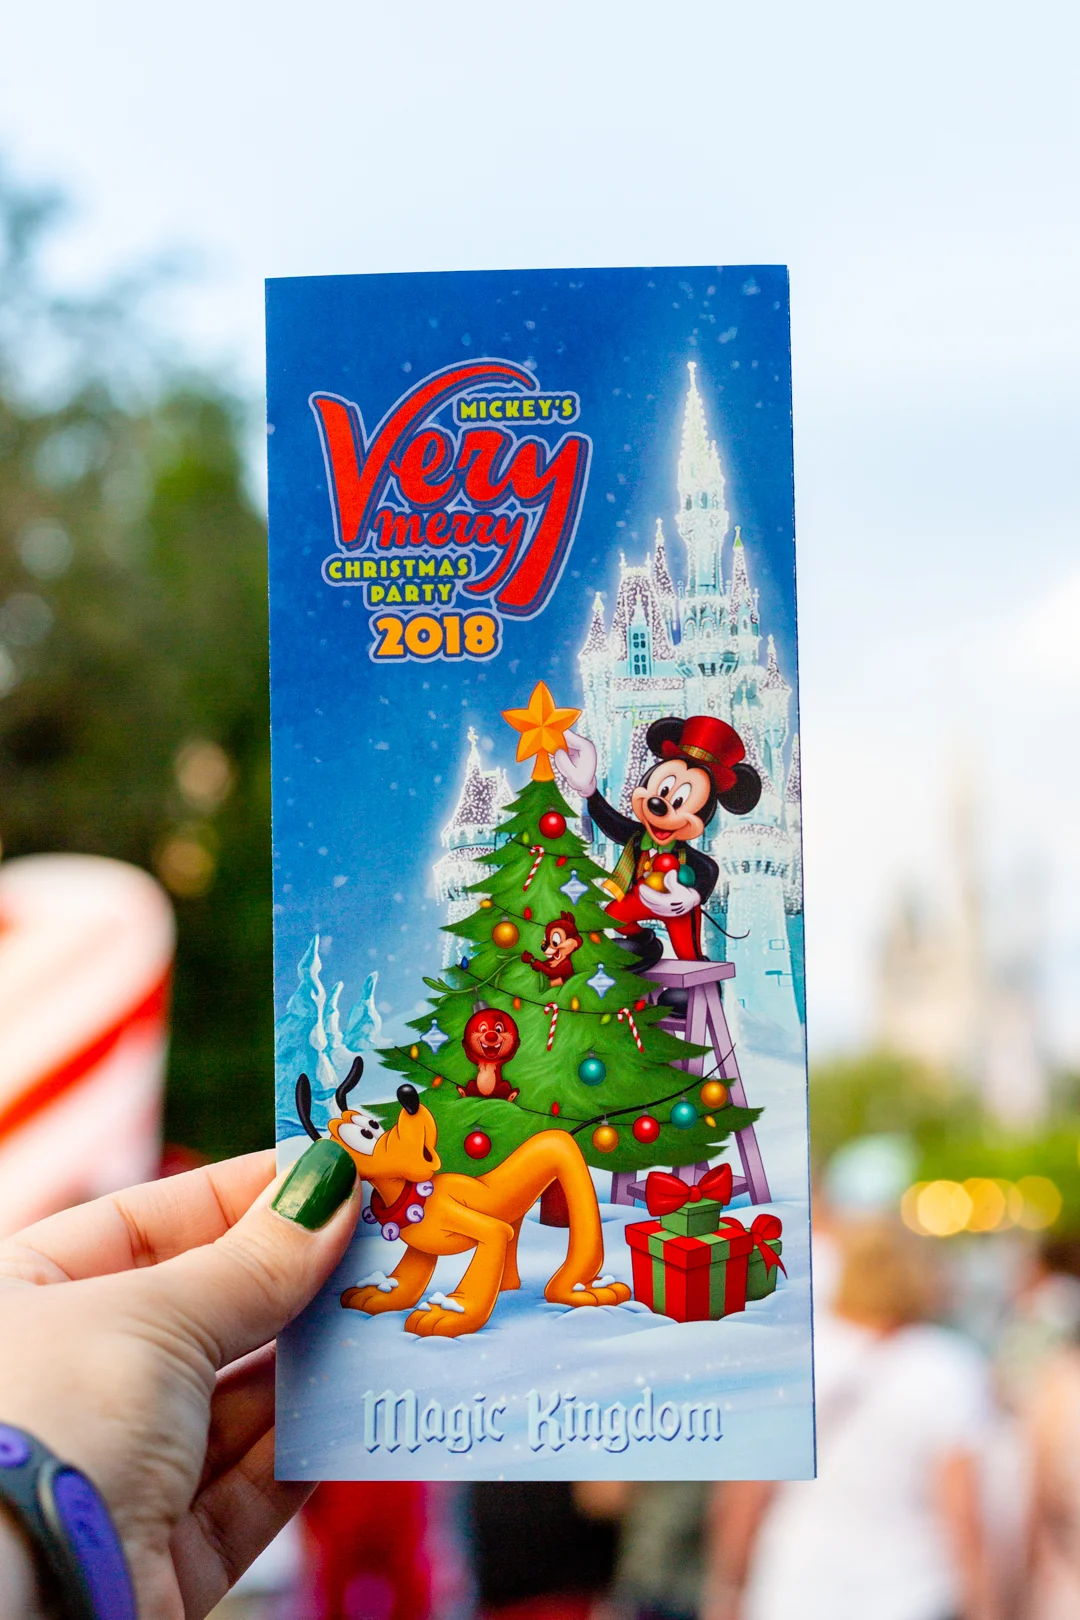 WDW Very Merry Christmas party guide.